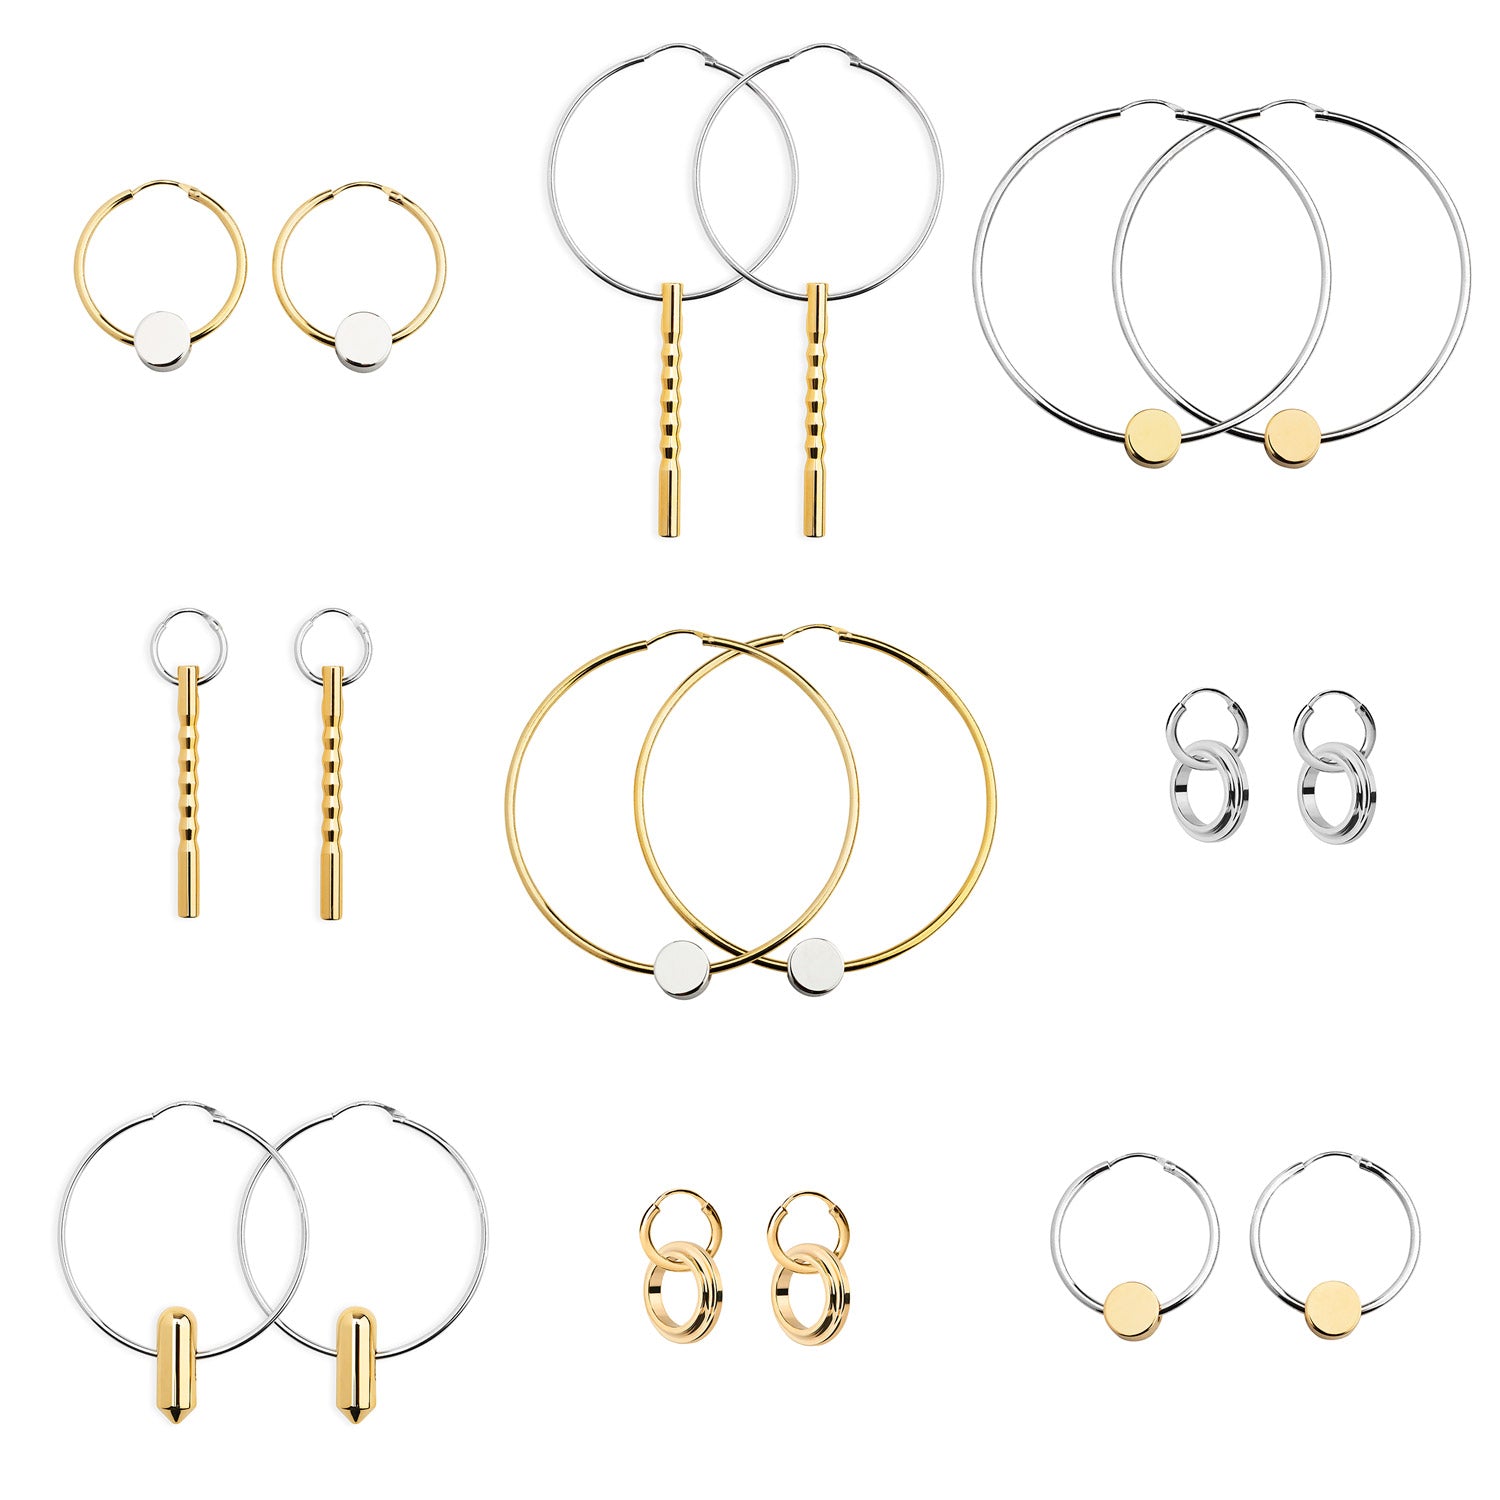 gold and silver hoop earrings | Alice Made This